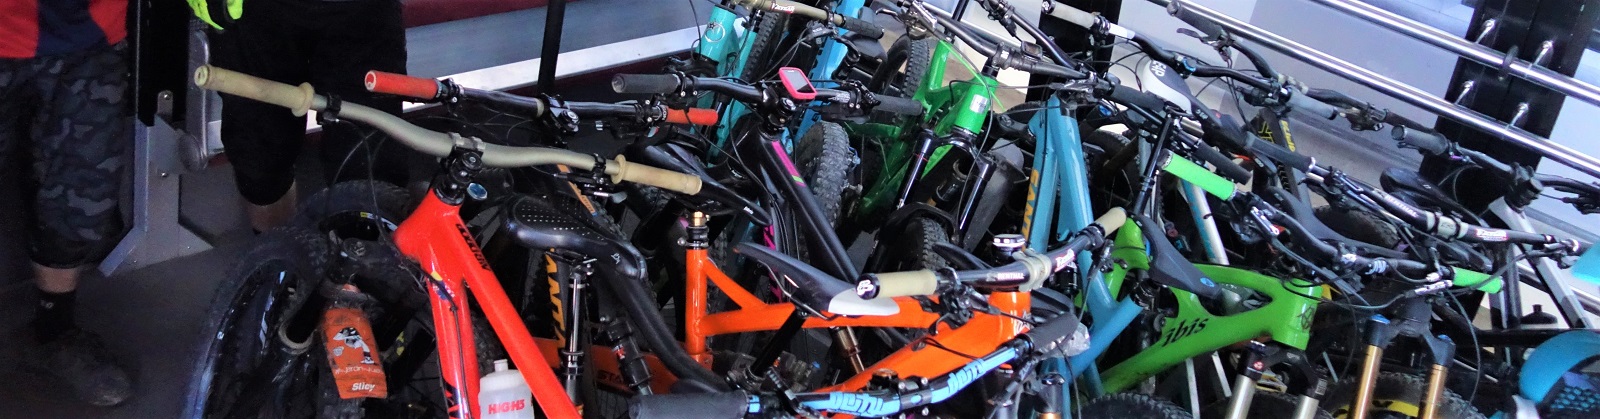 How many bikes can you fit in a telecabine? Many. You can fit many.